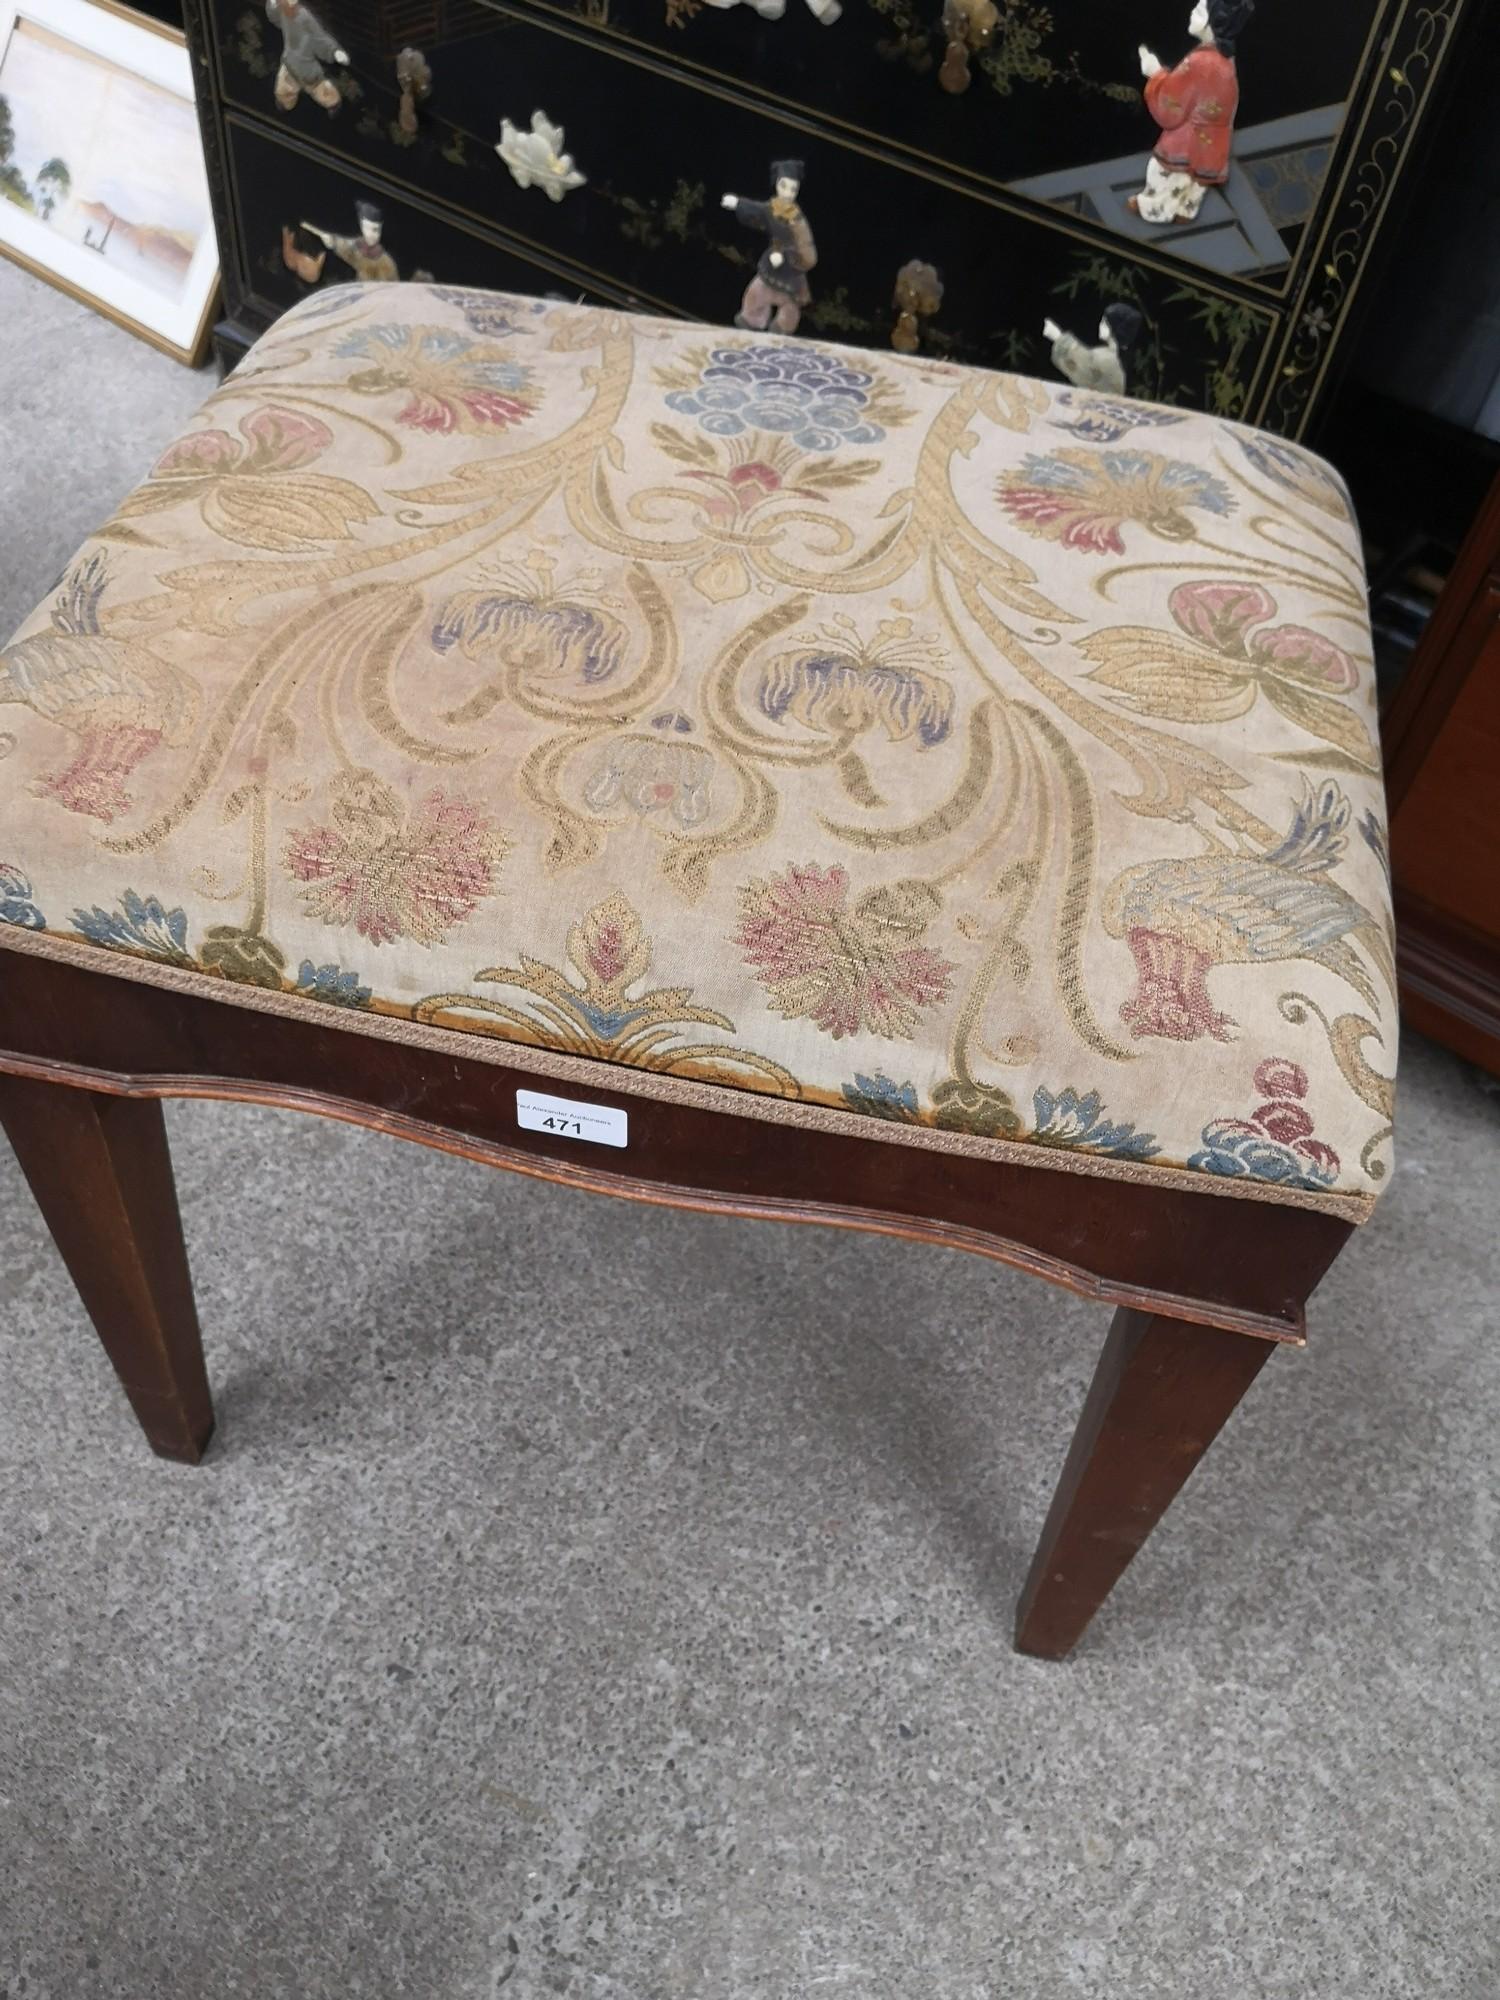 Edwardian period piano stool with art deco style upholstery. - Image 2 of 3